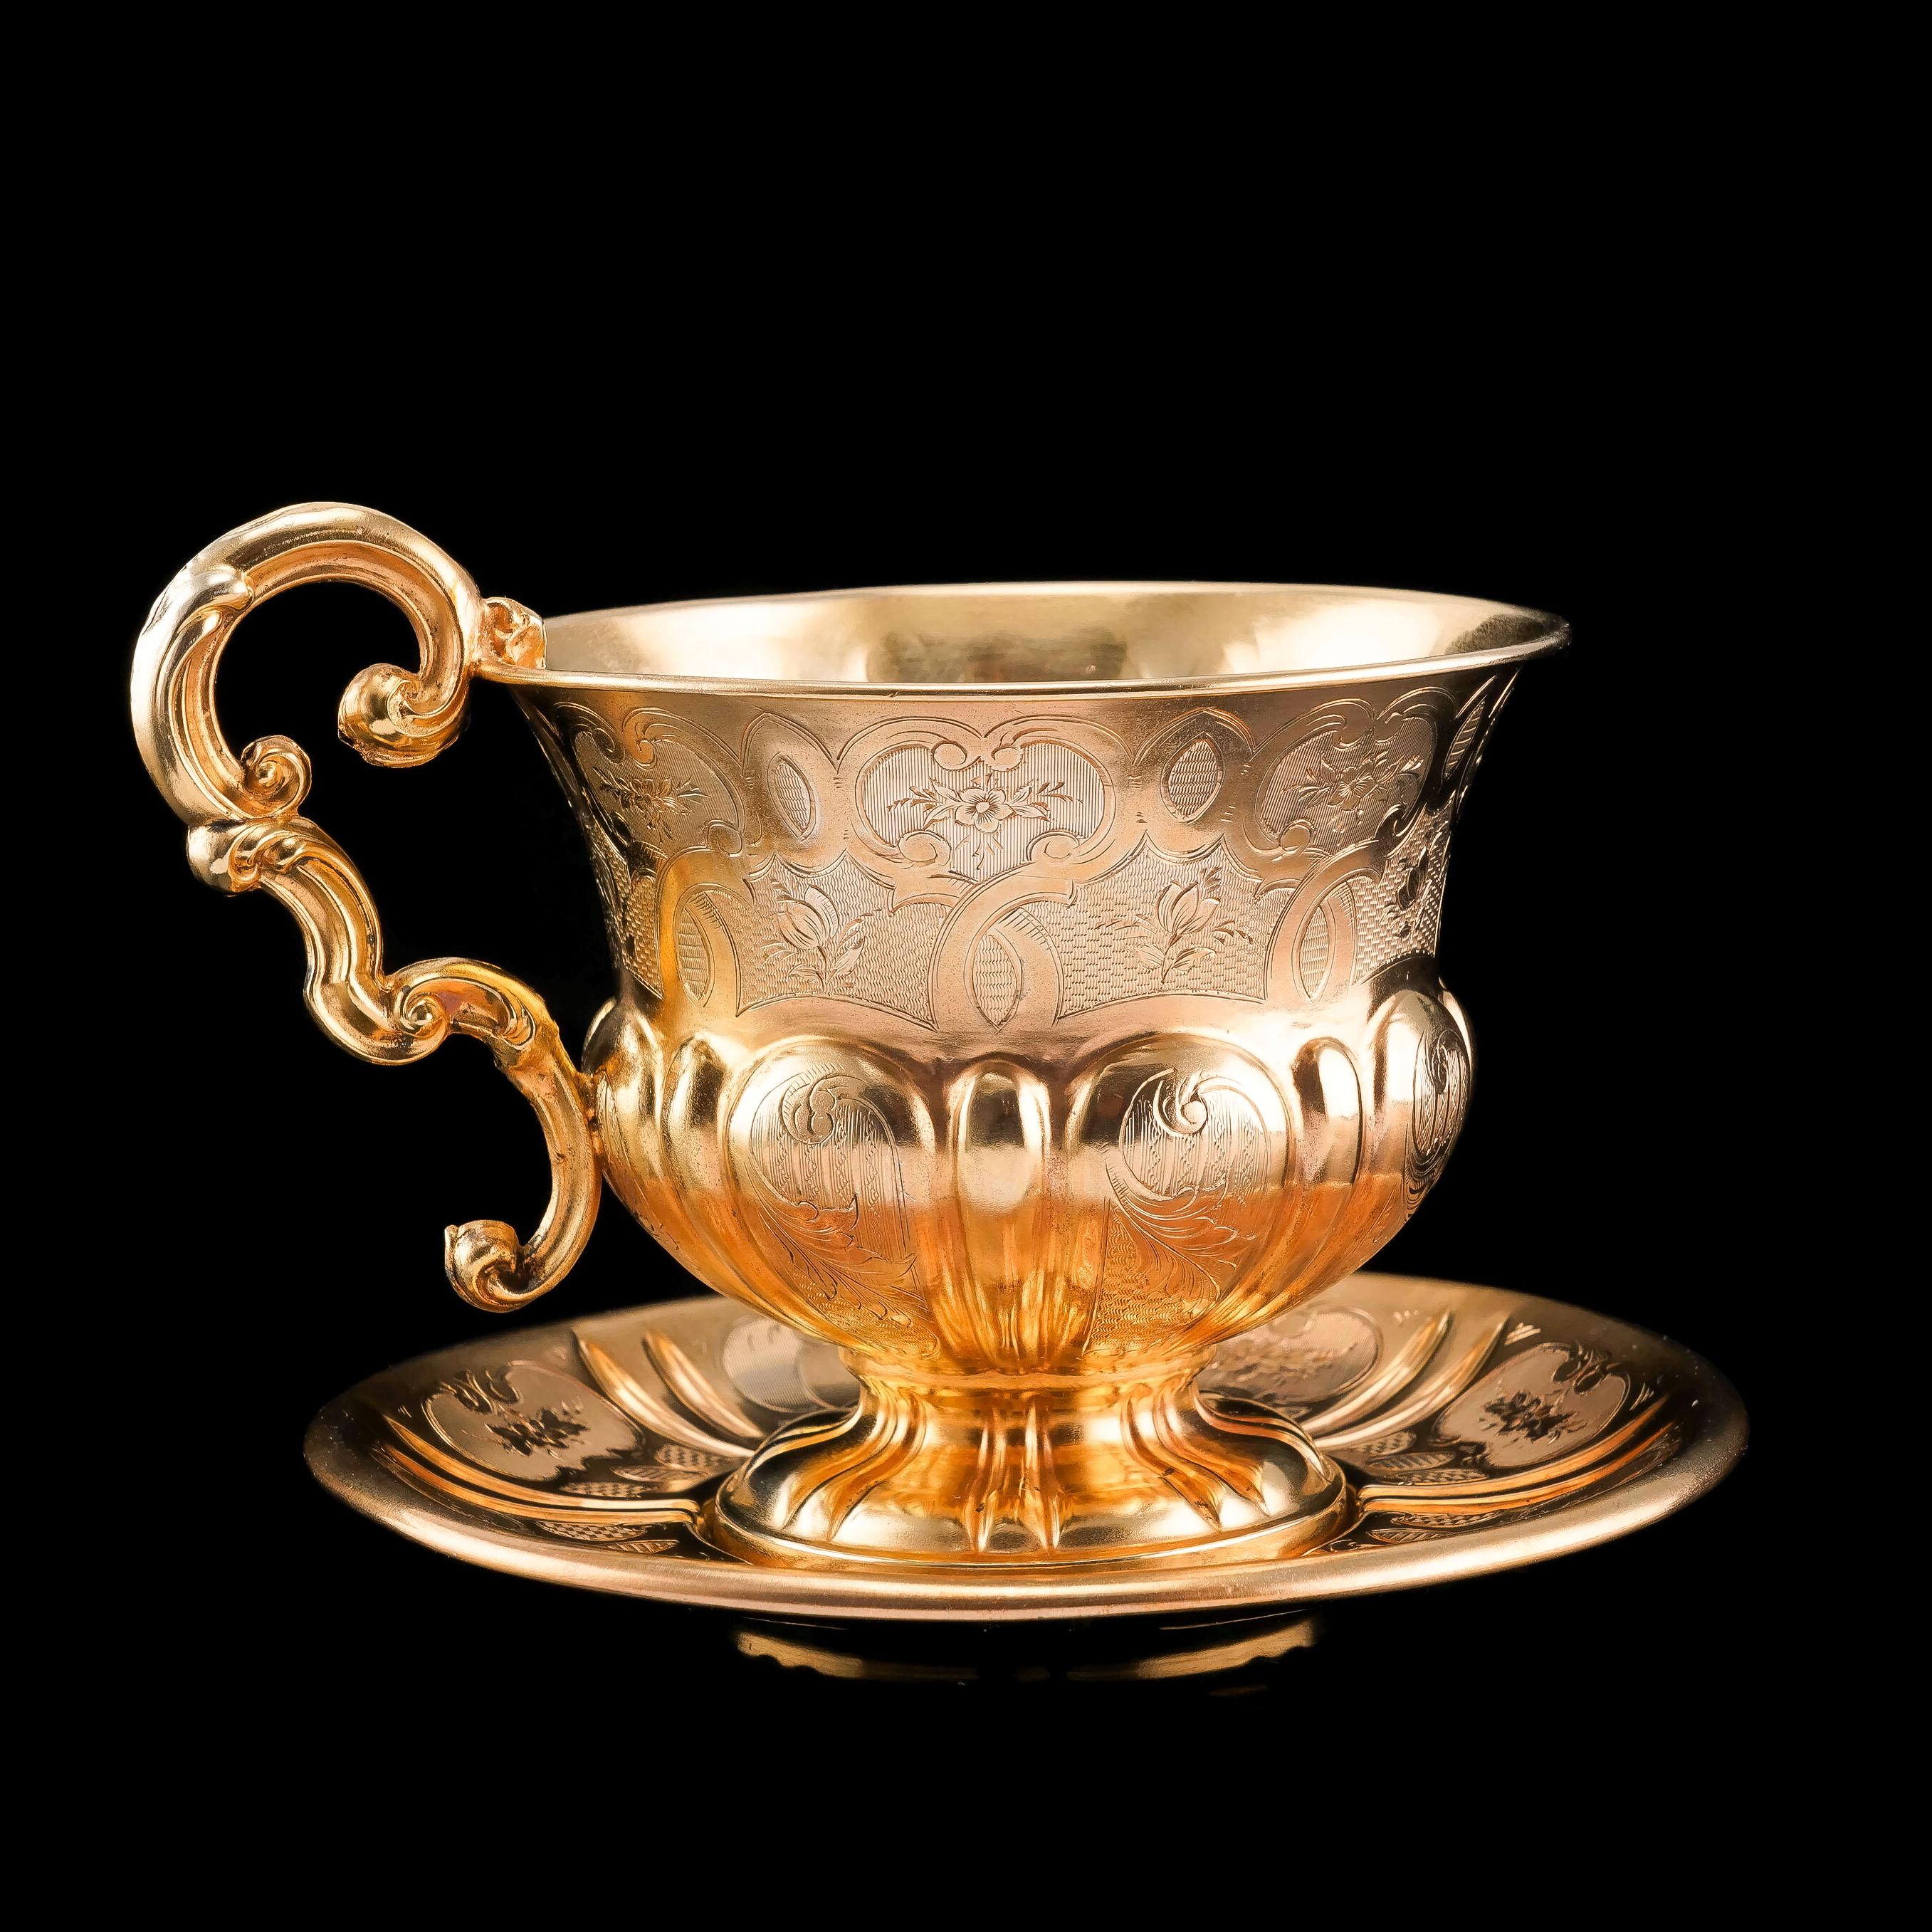 19th Century Antique Solid Silver Gilt Cup & Saucer with Fine Engravings, c.1880 For Sale